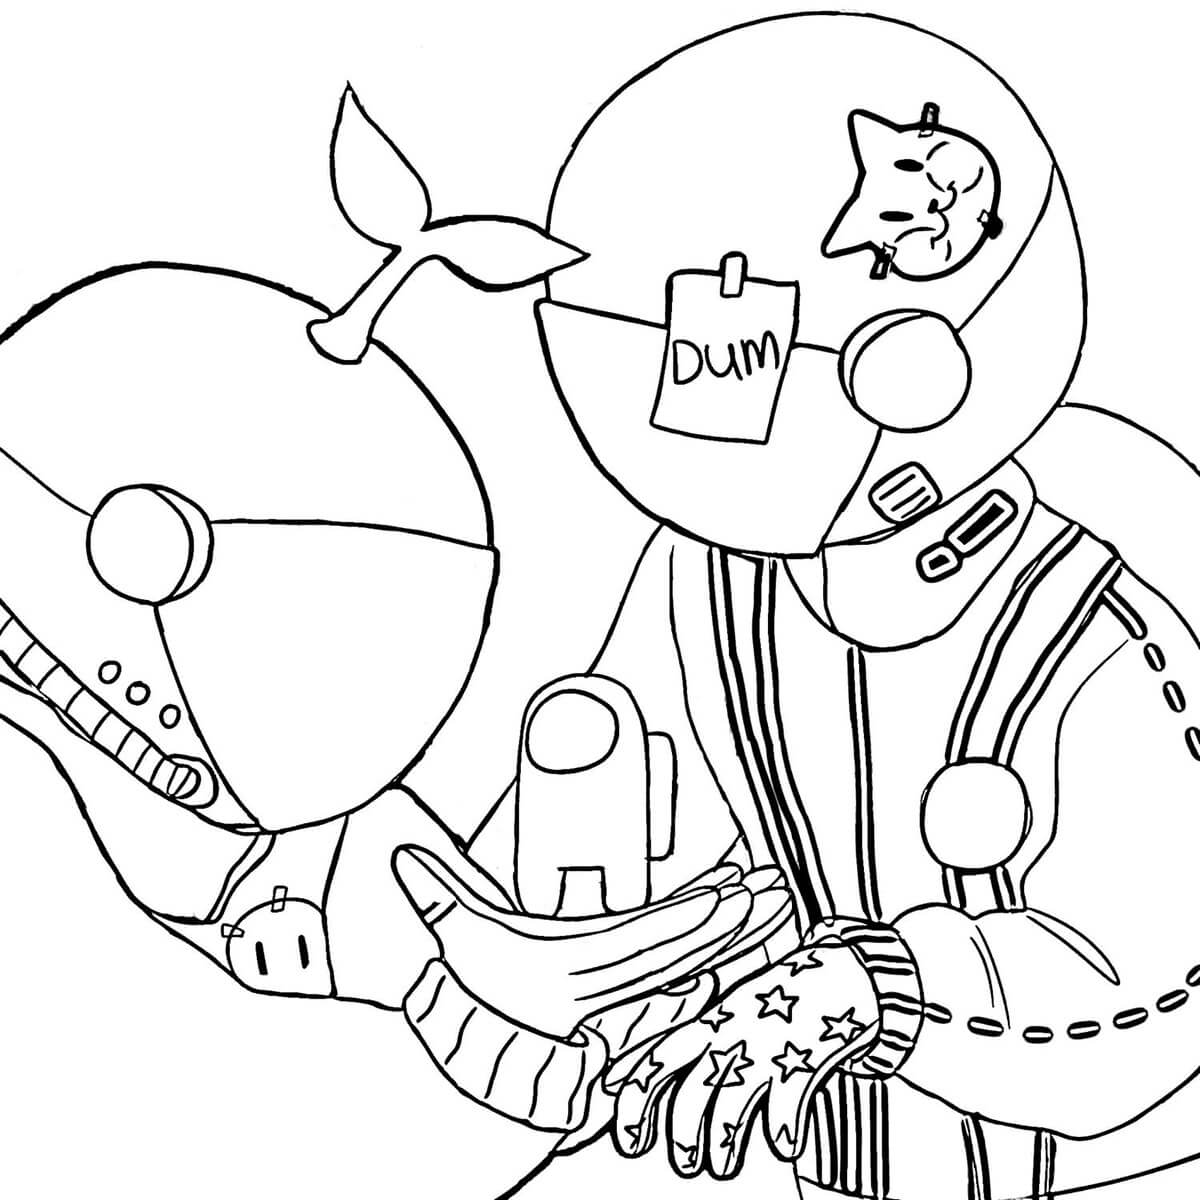 Among Us 9 Coloring Page Free Printable Coloring Pages for Kids